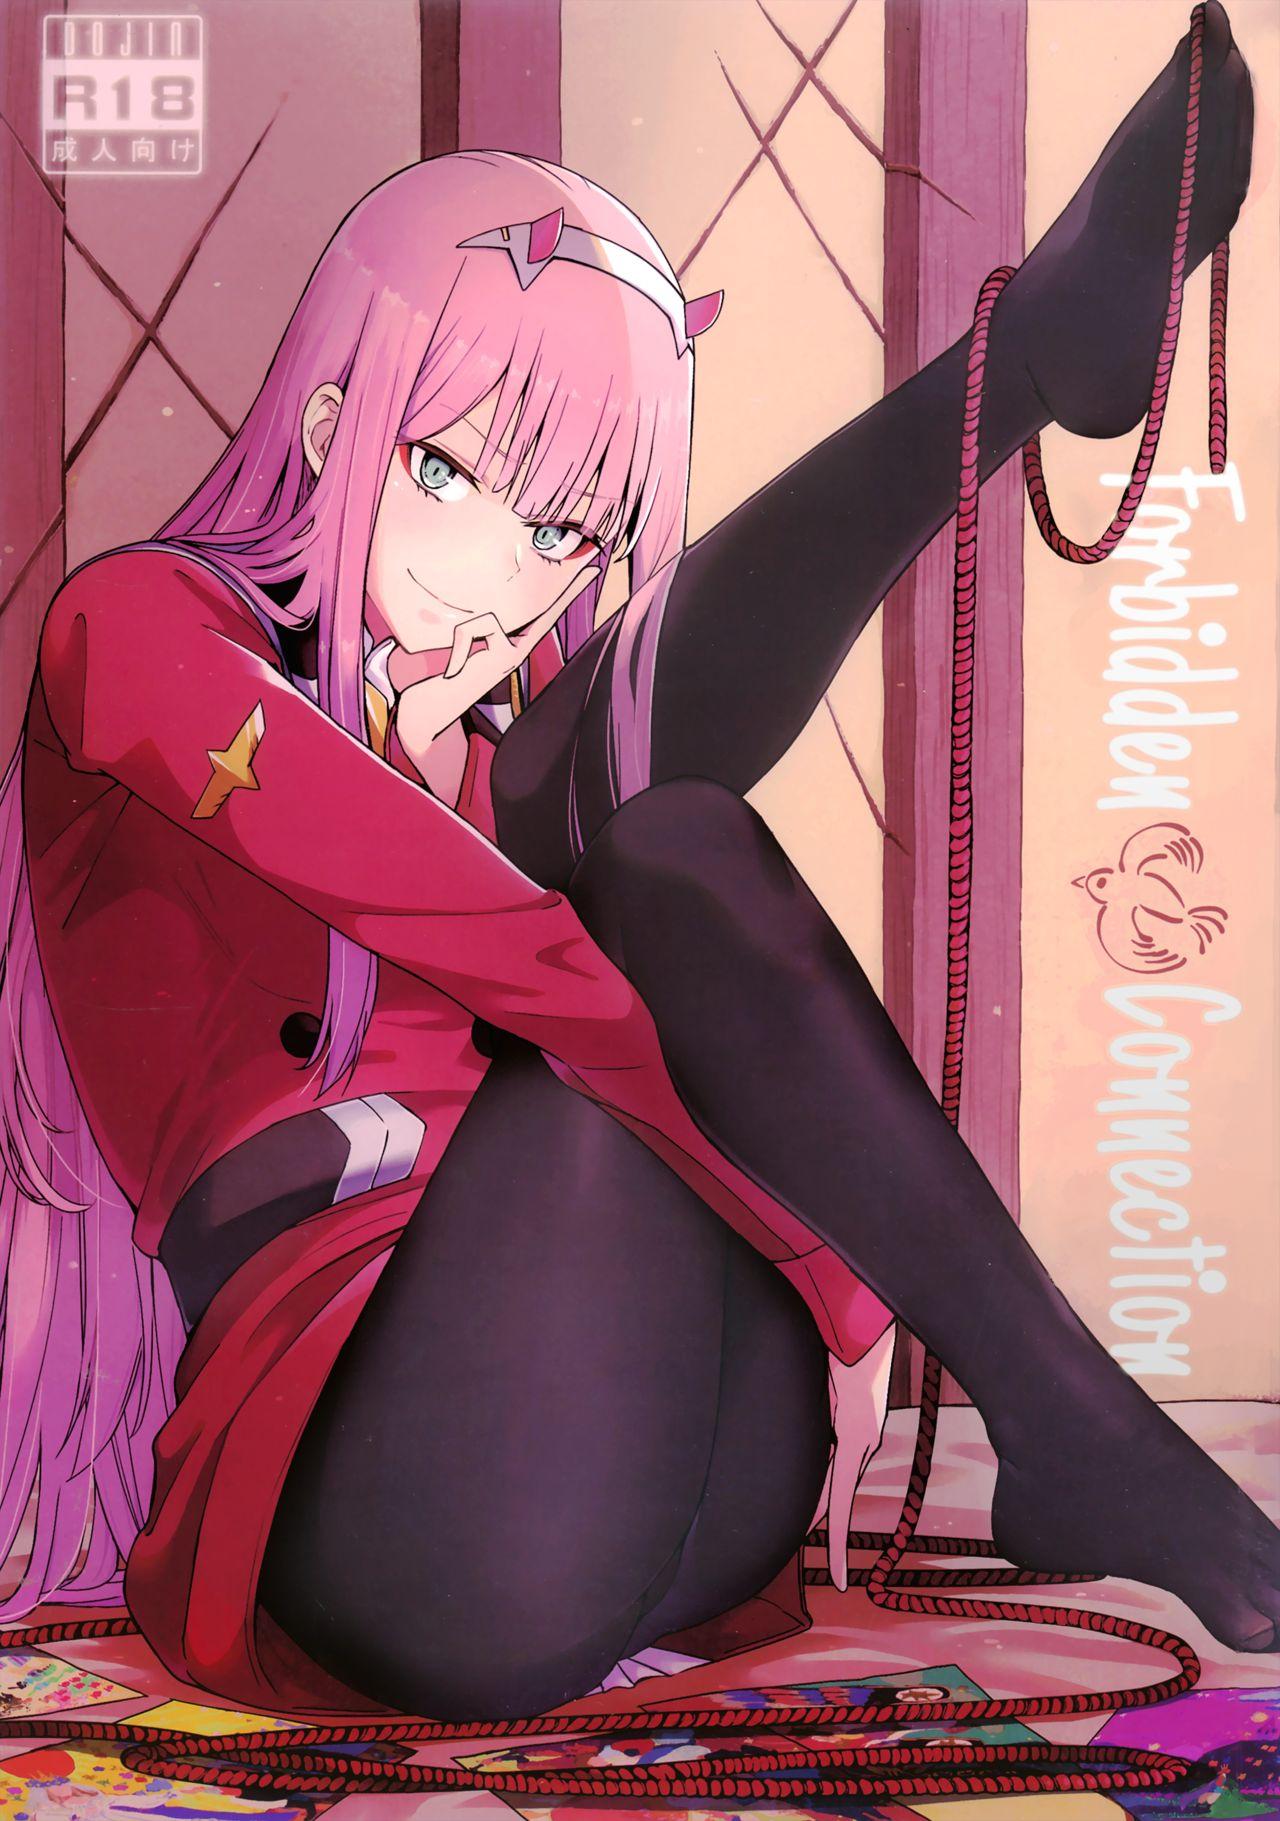 Morocha Forbidden Connection - Darling in the franxx Body Massage - Page 1